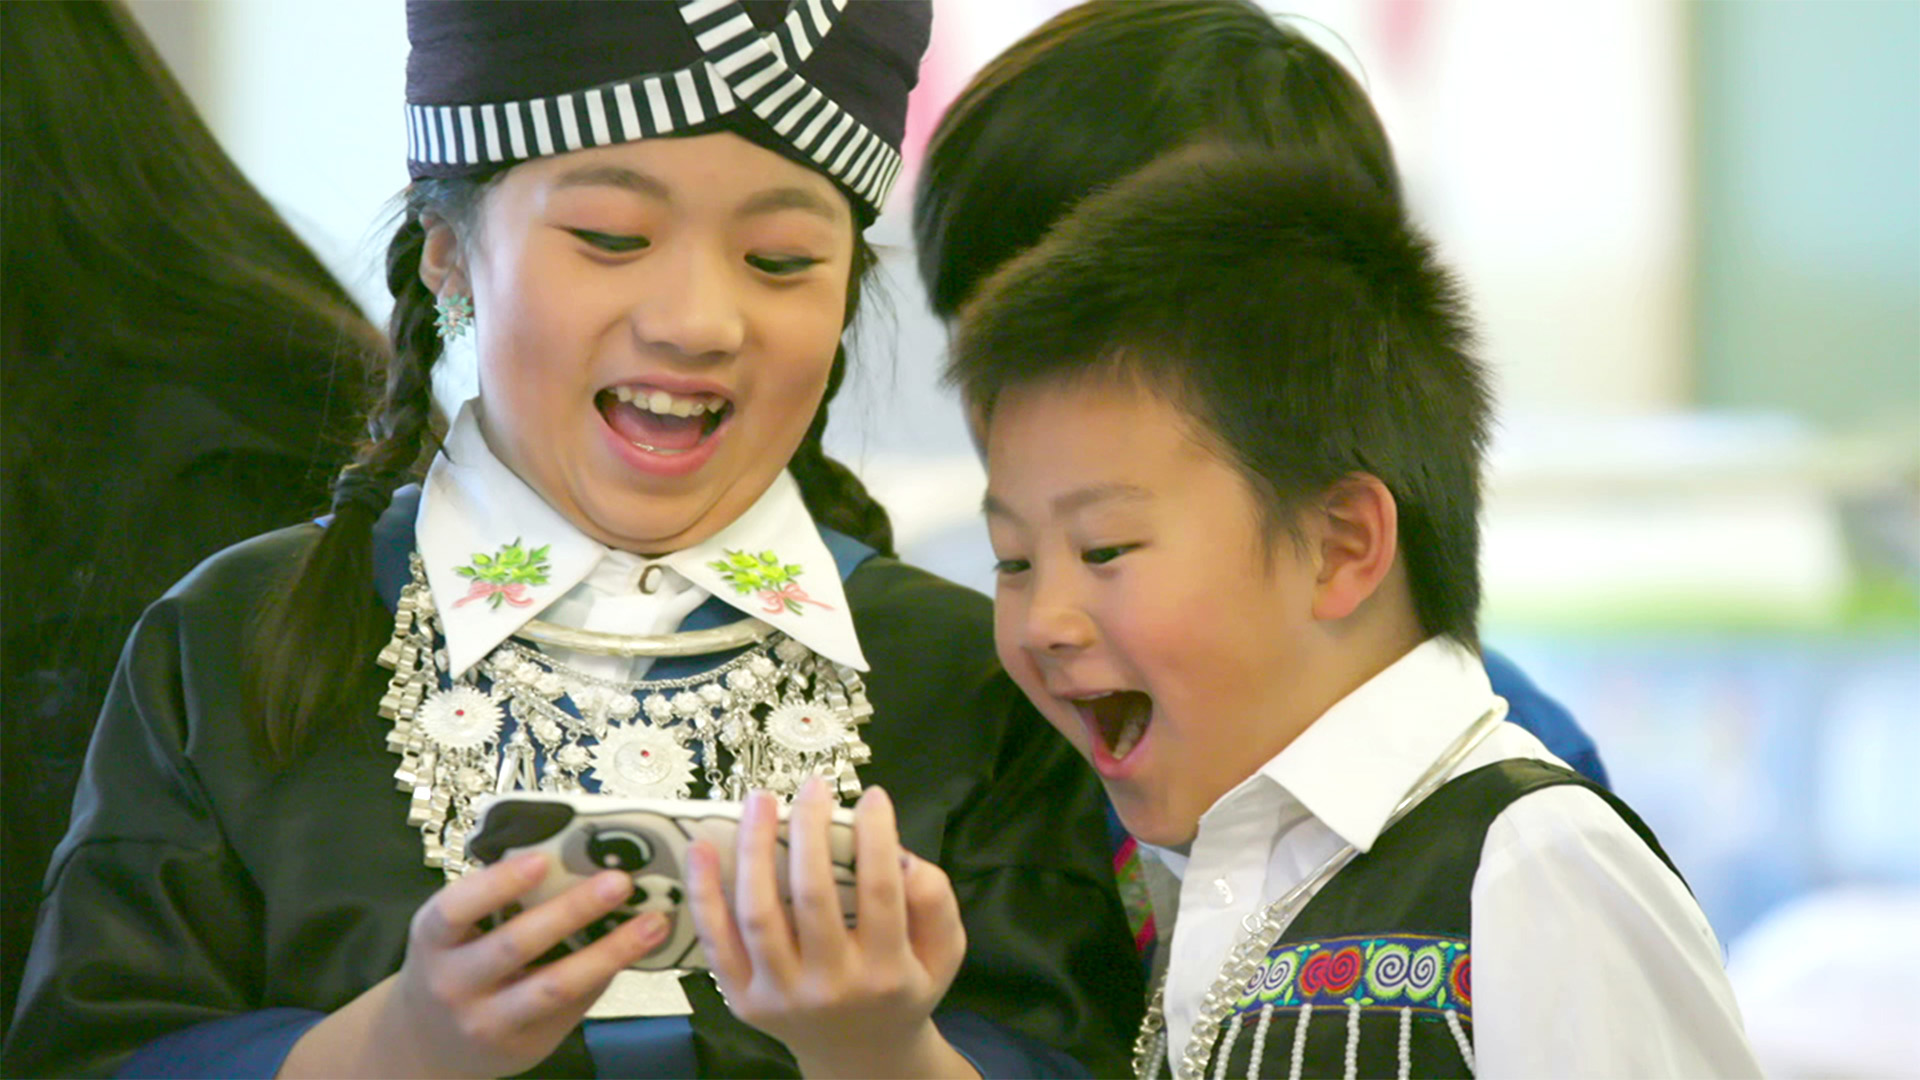 Two Hmong children in Wisconsin smile together while looking into a smart phone.